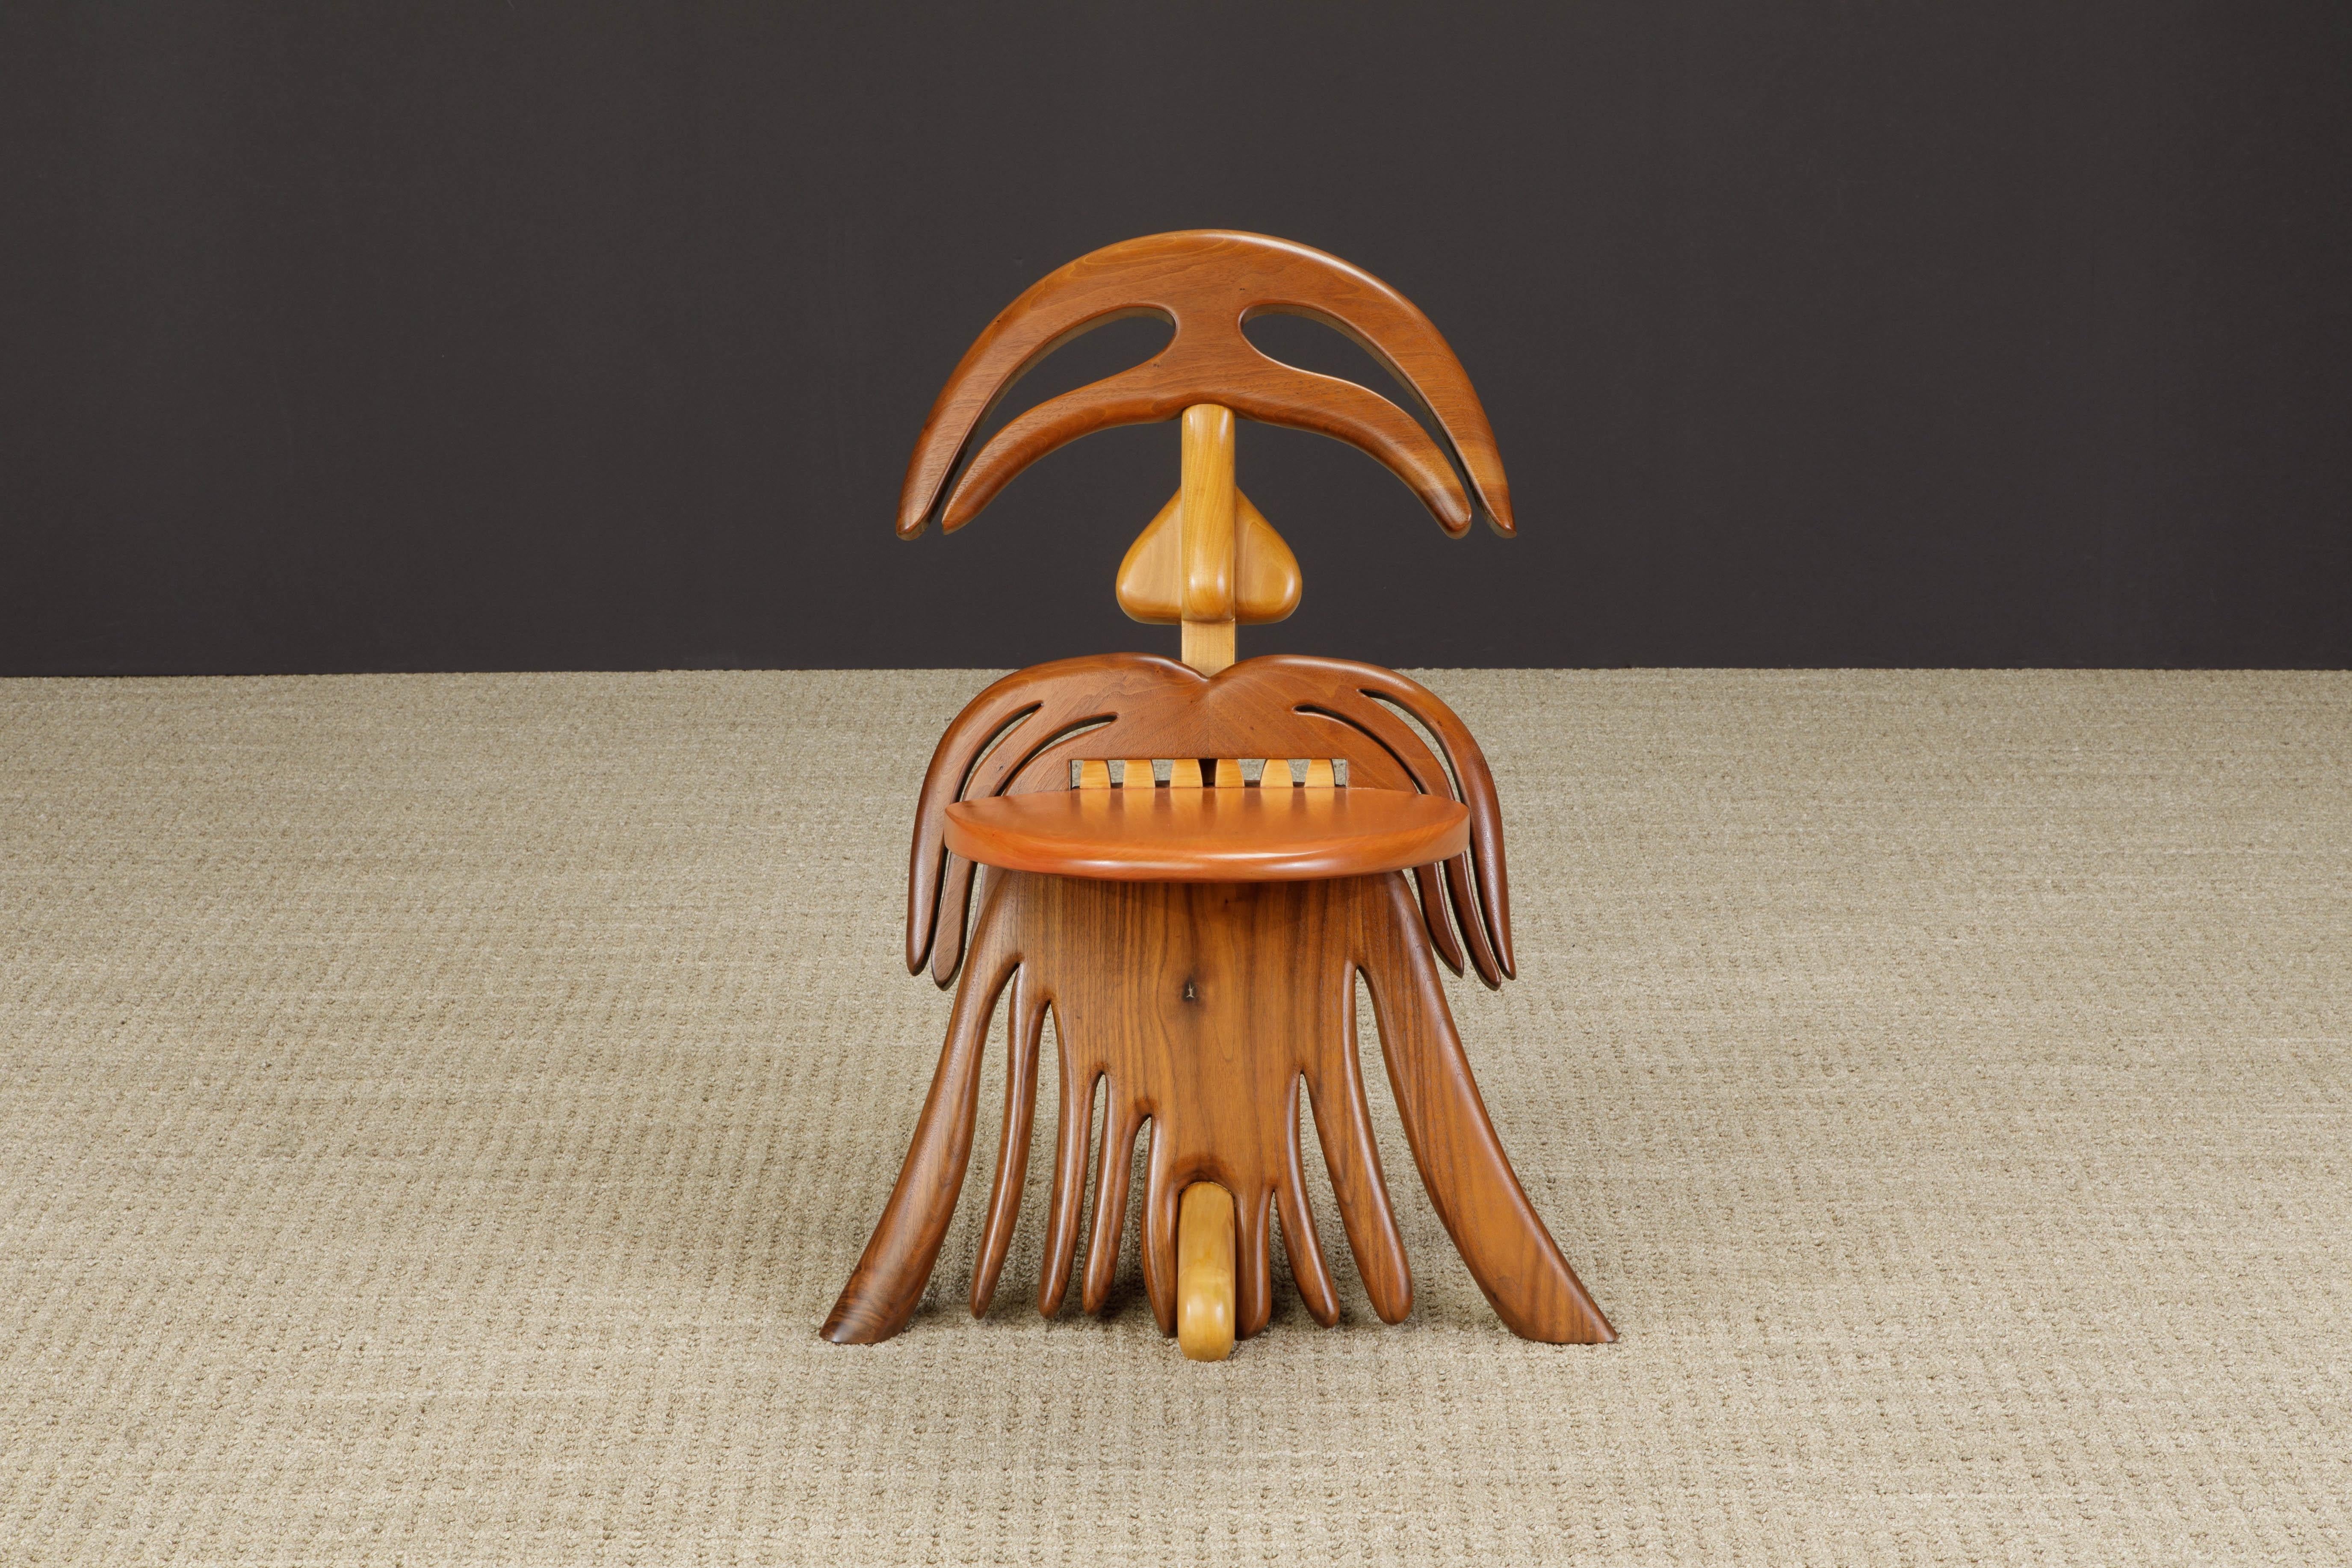 This work of Post-Modern functional art is called the 'Tongue' chair by artist and sculptor Alan Siegel, exhibited in 1981 at the Betsy Rosenfield Gallery in Chicago. Signed and dated (1981) by the artist underneath the seat. Carved from Maple and